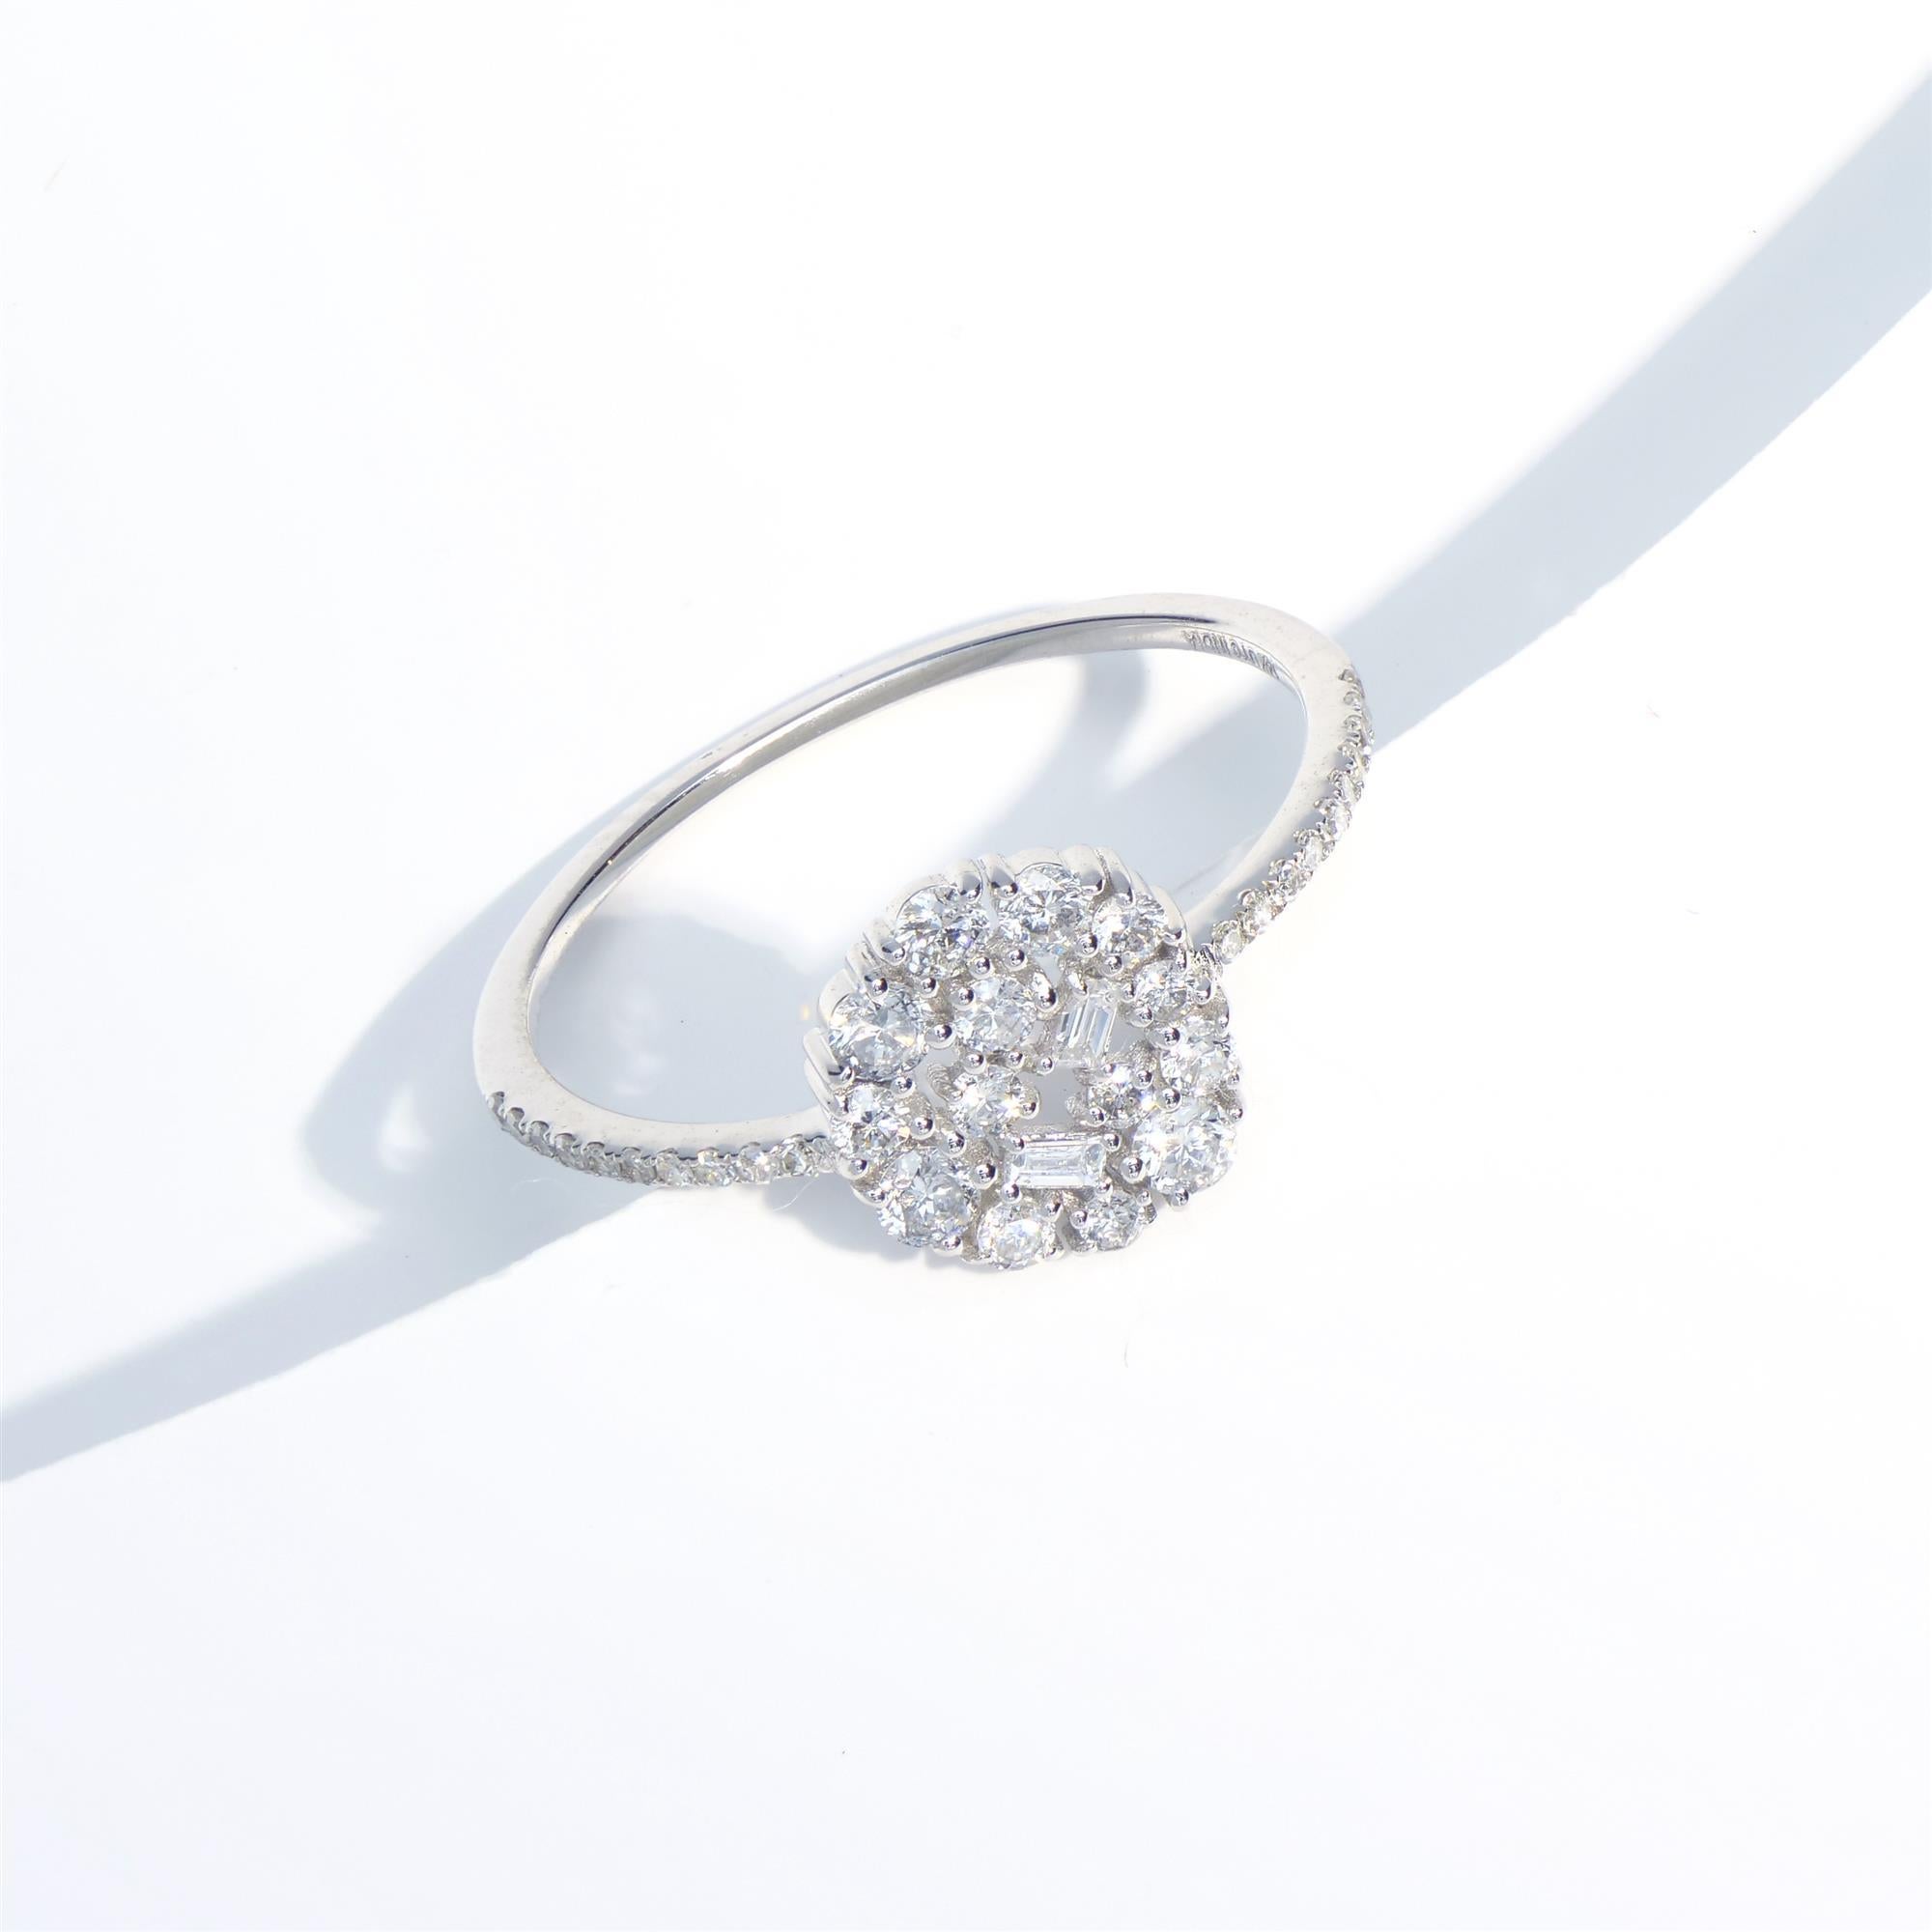 For Sale:  Luxle 3/8 Carat T.W. Diamond Cluster Ring in 14k White Gold 8